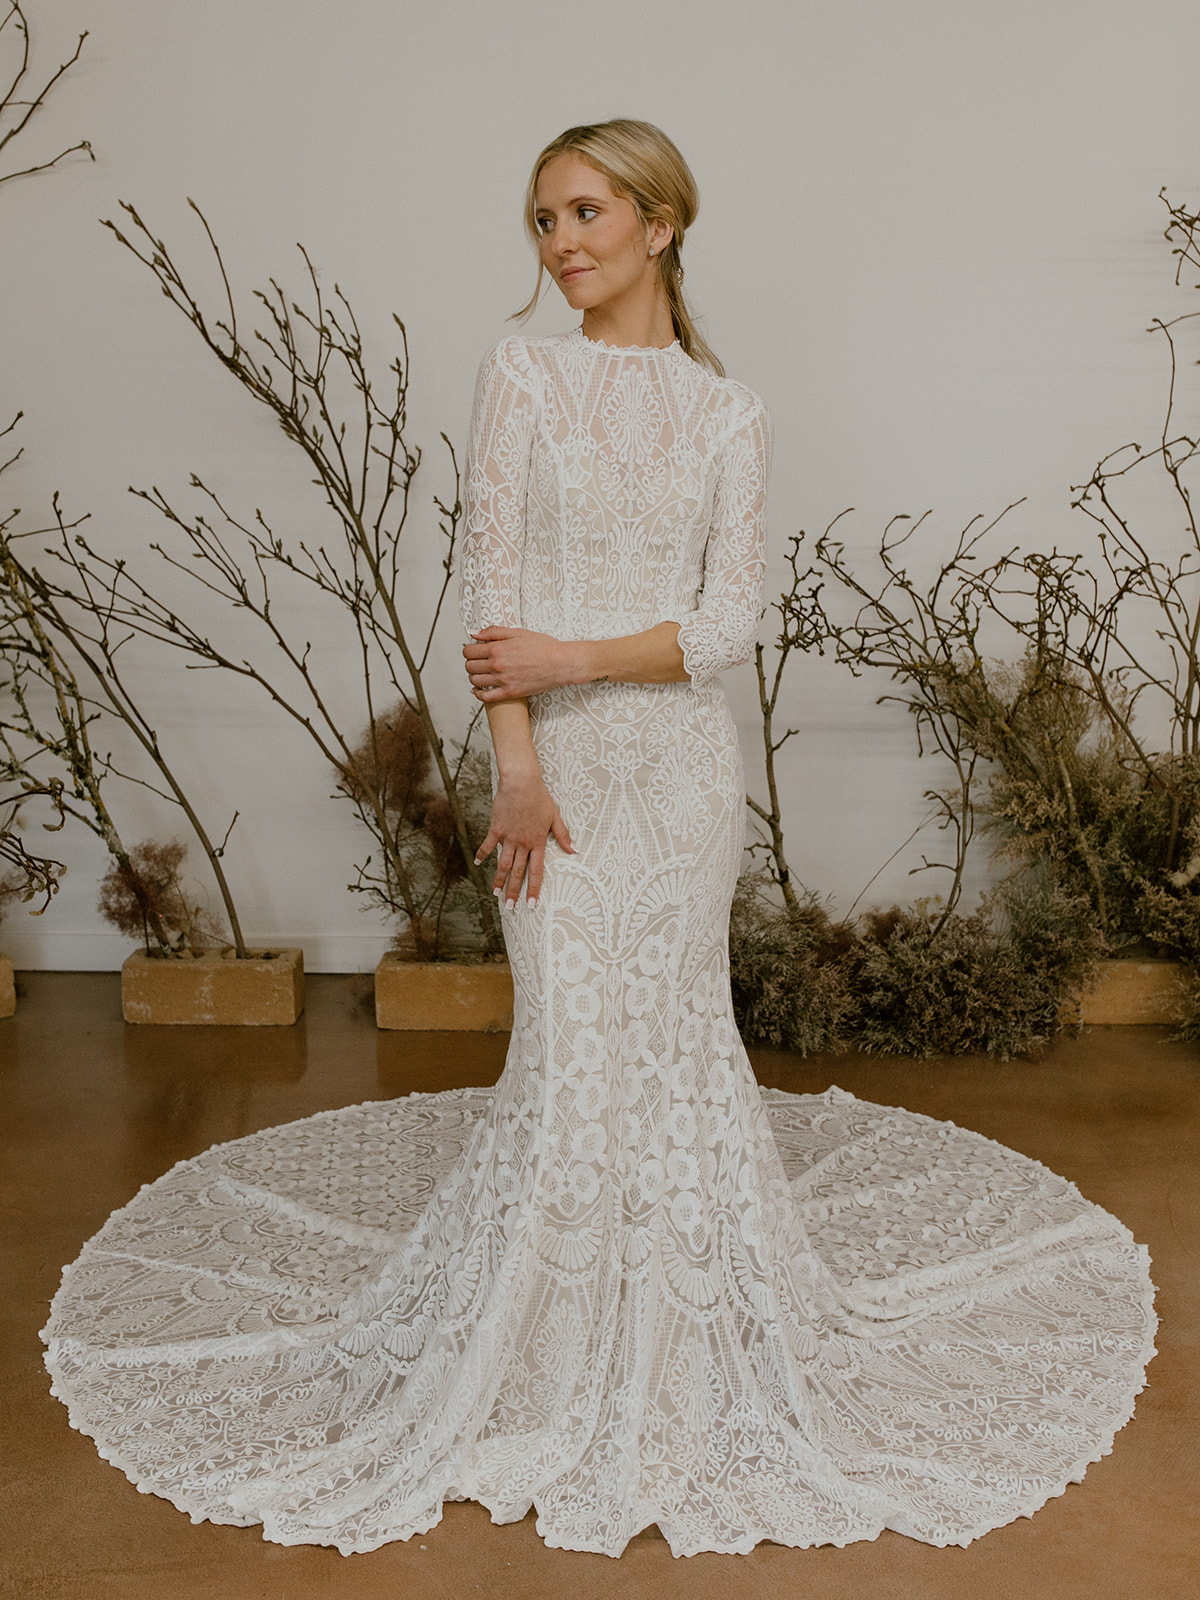 Timeless Long Sleeve Lace Wedding Dress with Plunging Neckline